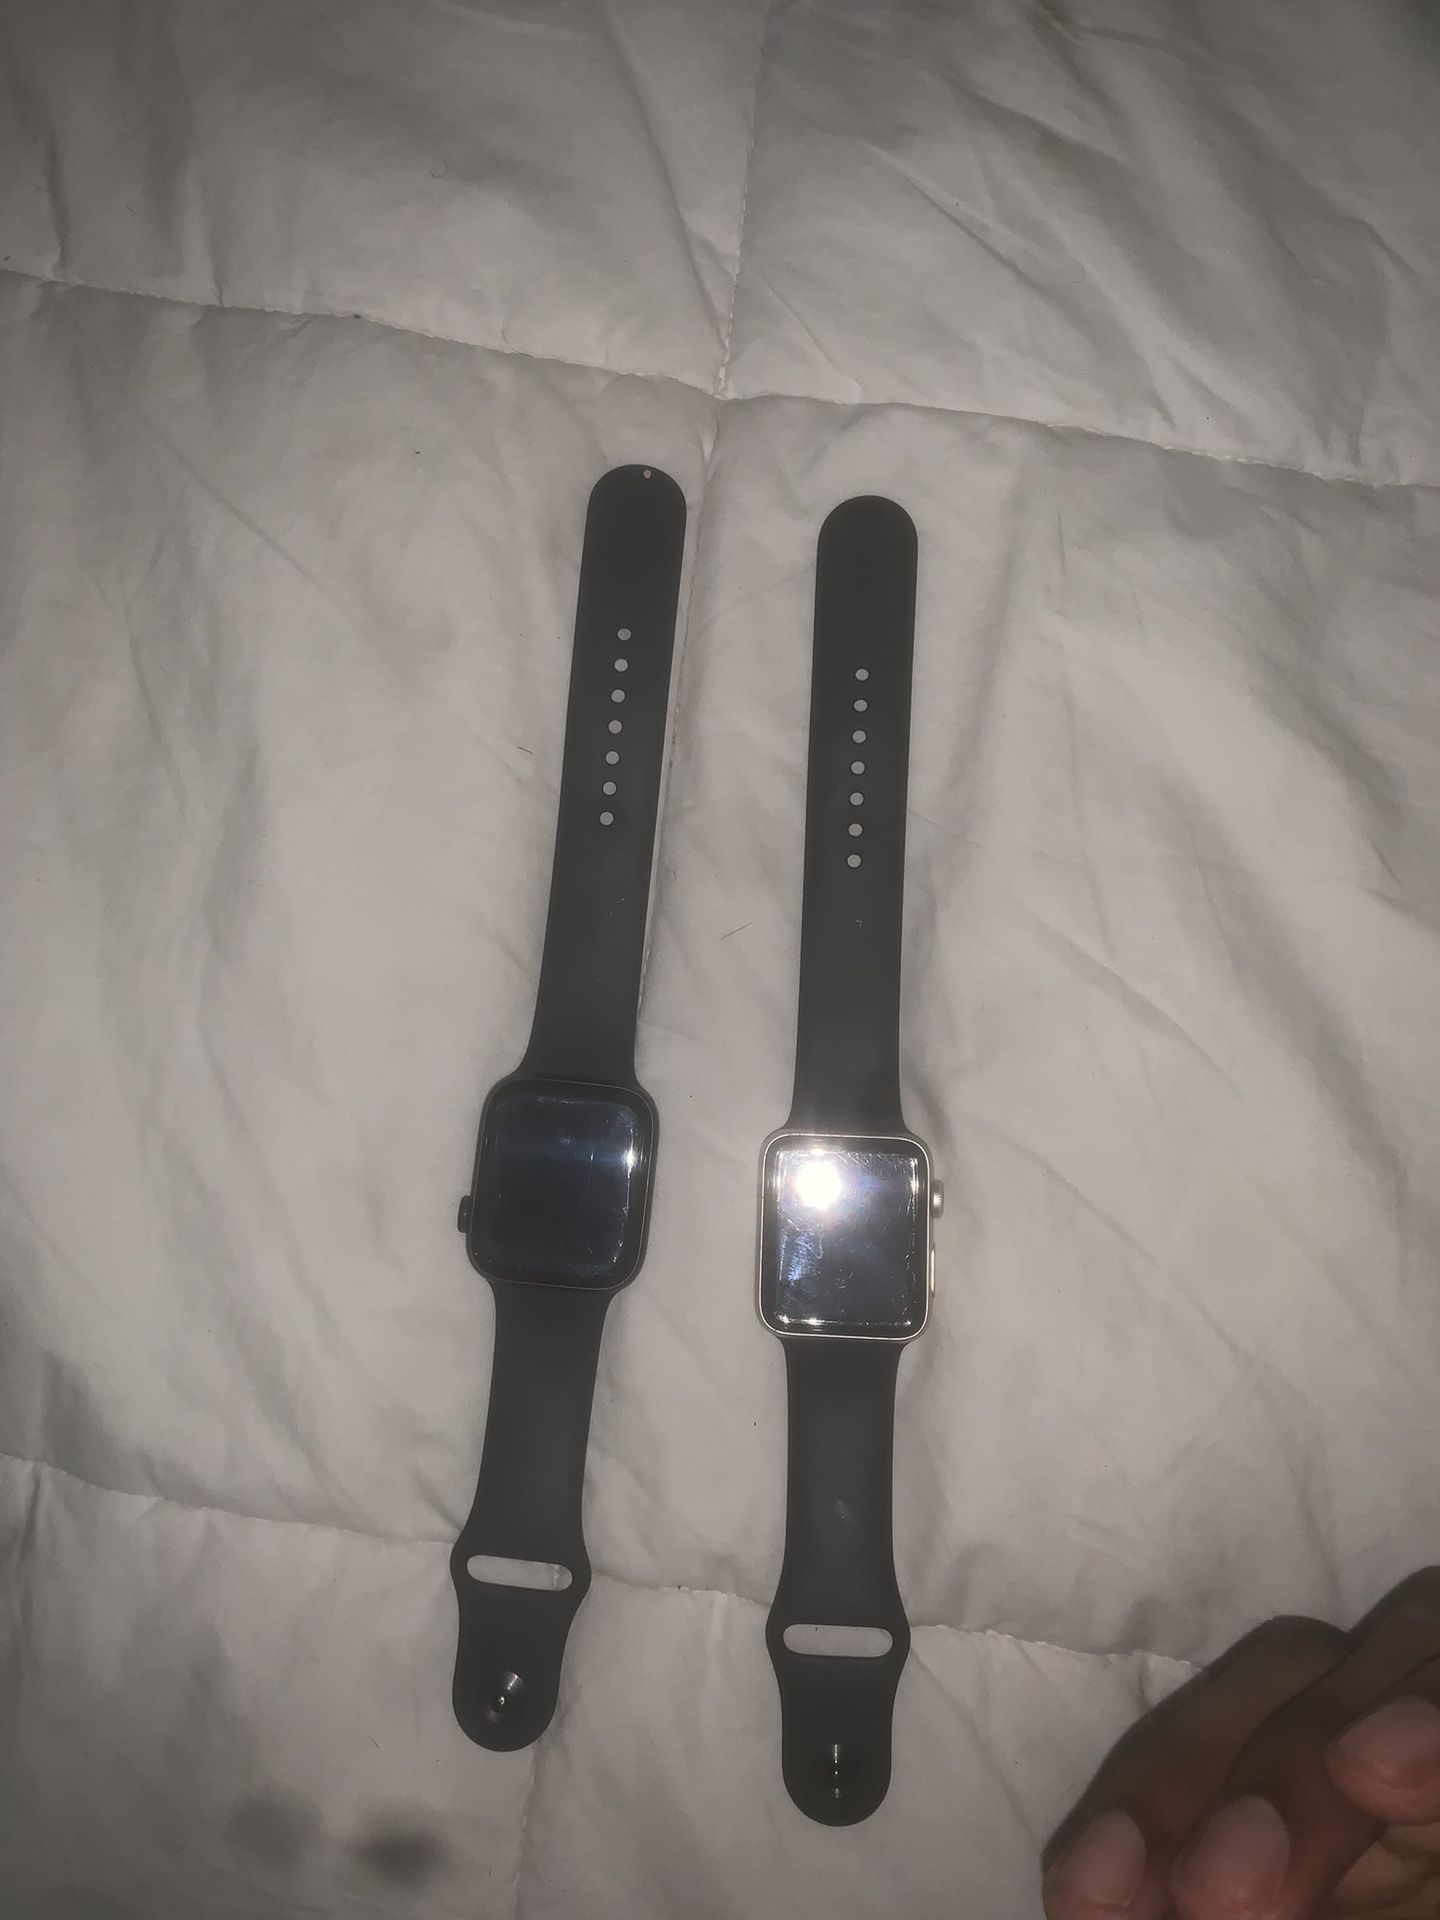 Apple Watches 